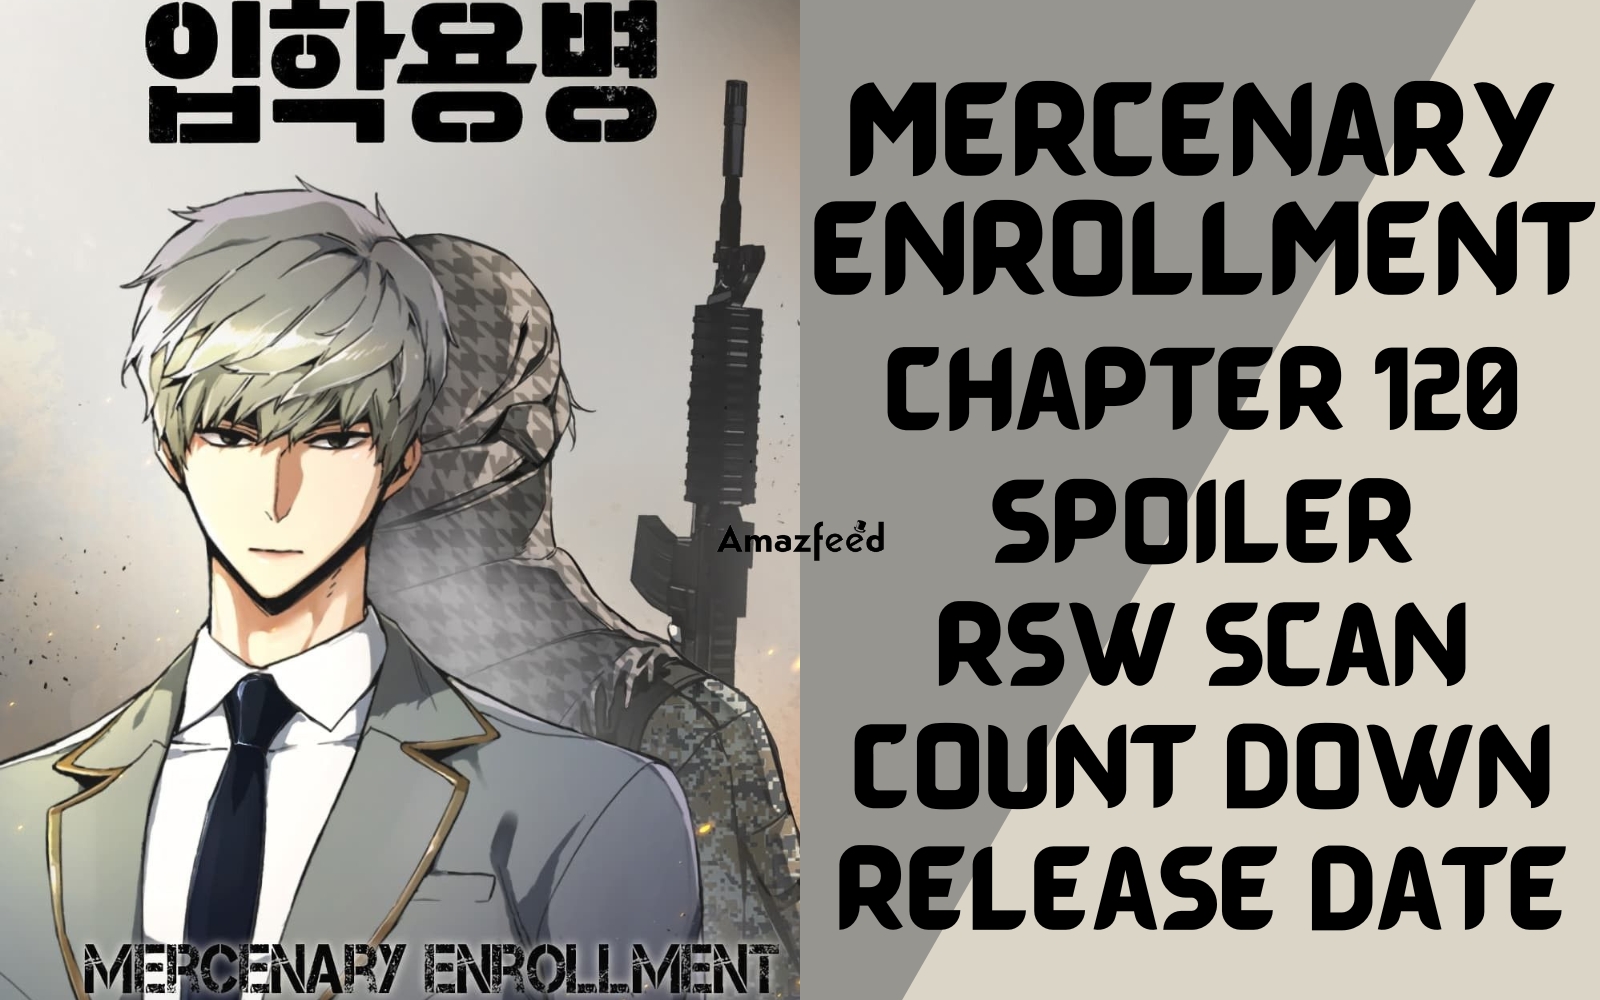 Mercenary Enrollment Chapter 120 Spoiler, Countdown, About, Synopsis, Release Date » Amazfeed